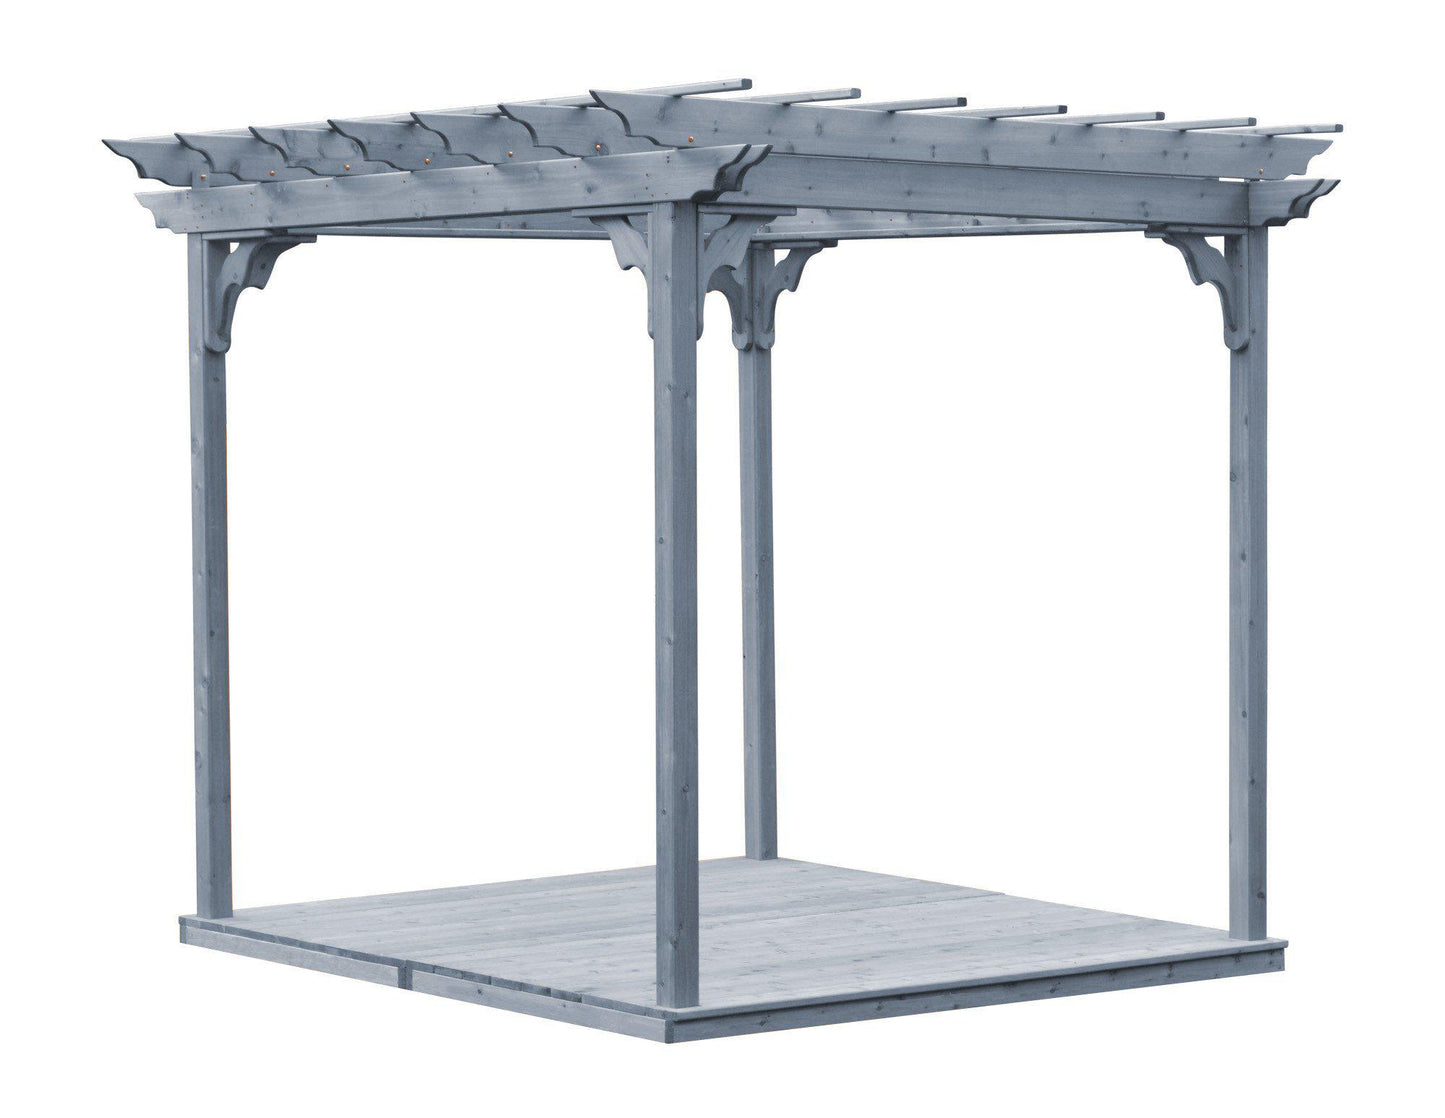 A&L Furniture Co. Western Red Cedar 6'x8' Pergola w/Deck & Swing Hangers - LEAD TIME TO SHIP 4 WEEKS OR LESS